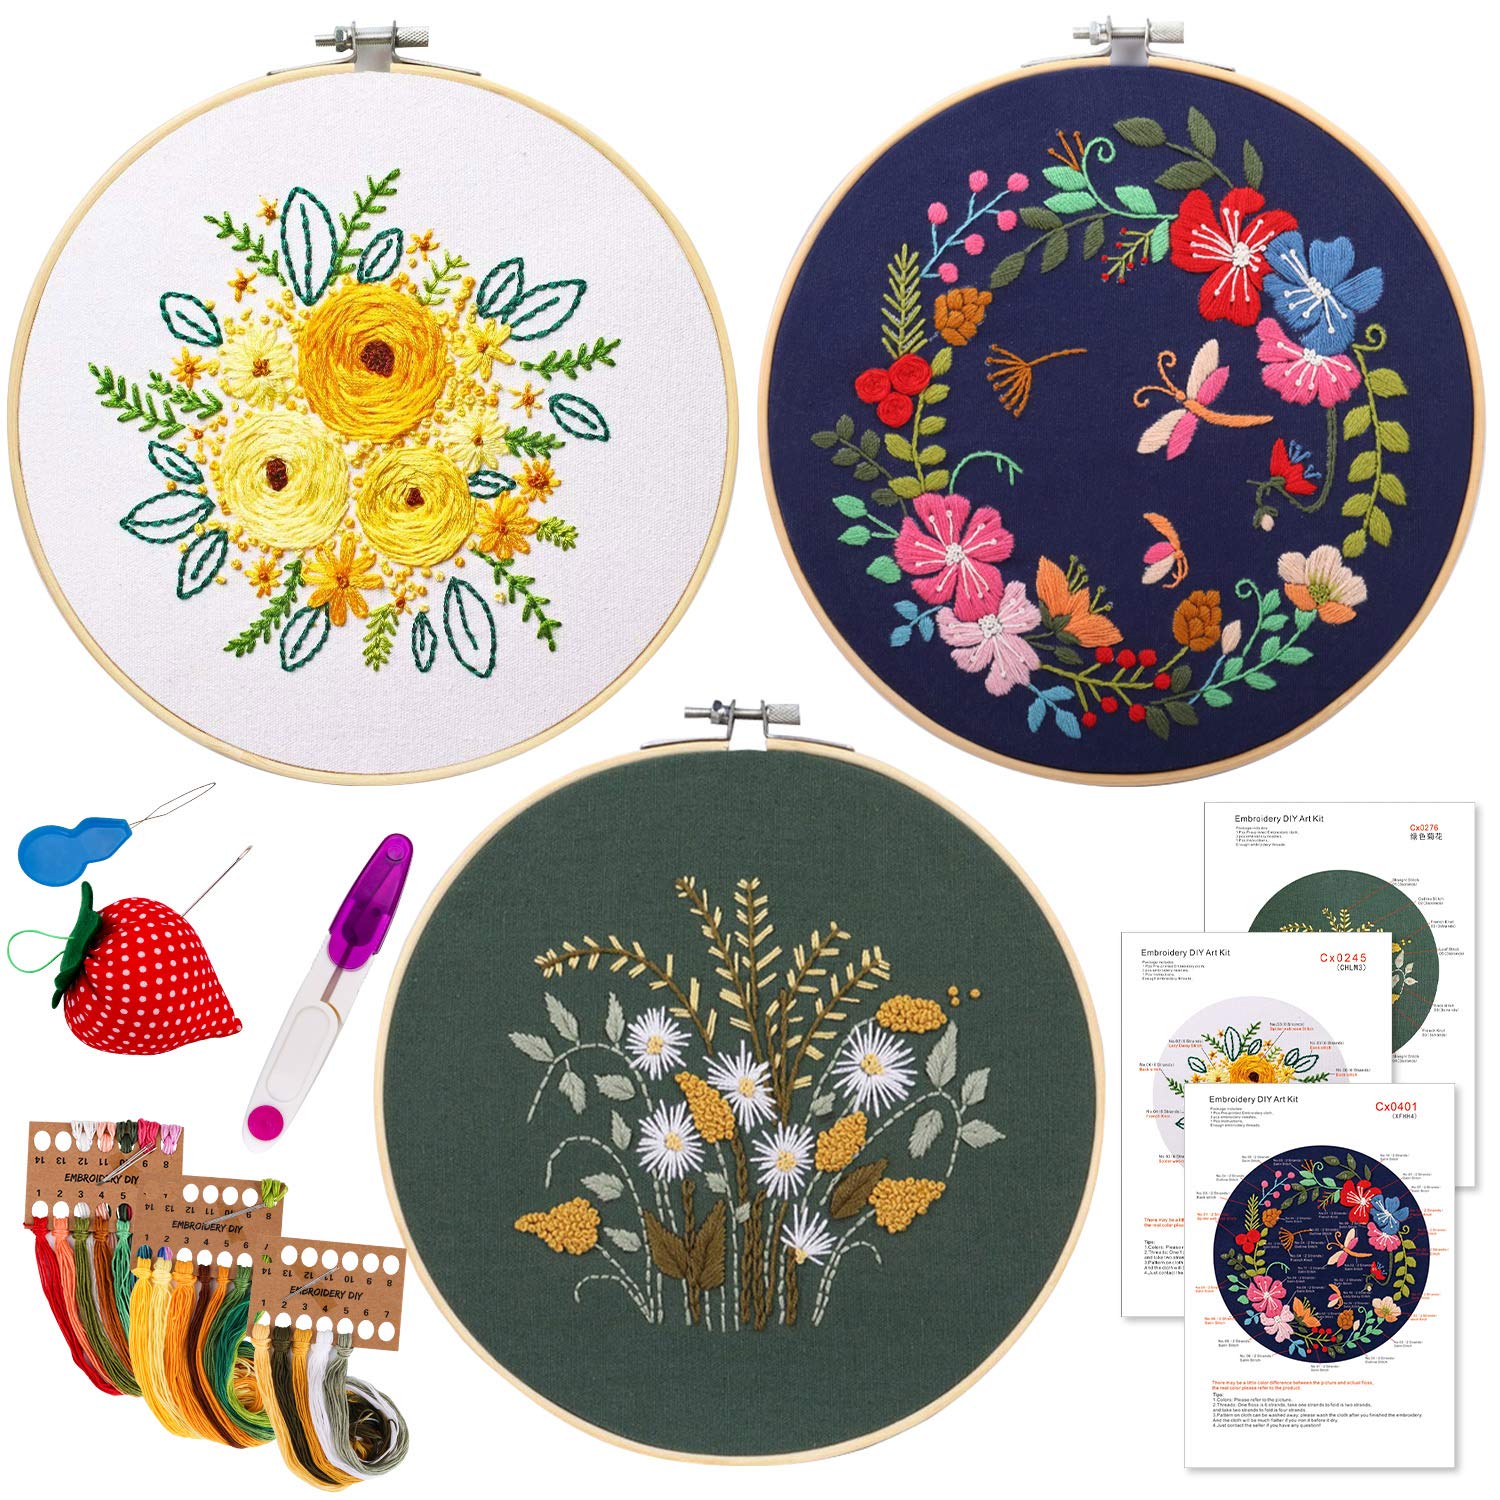 Embroidery Starter Kit with Instructions, Cross Stitch Kit for